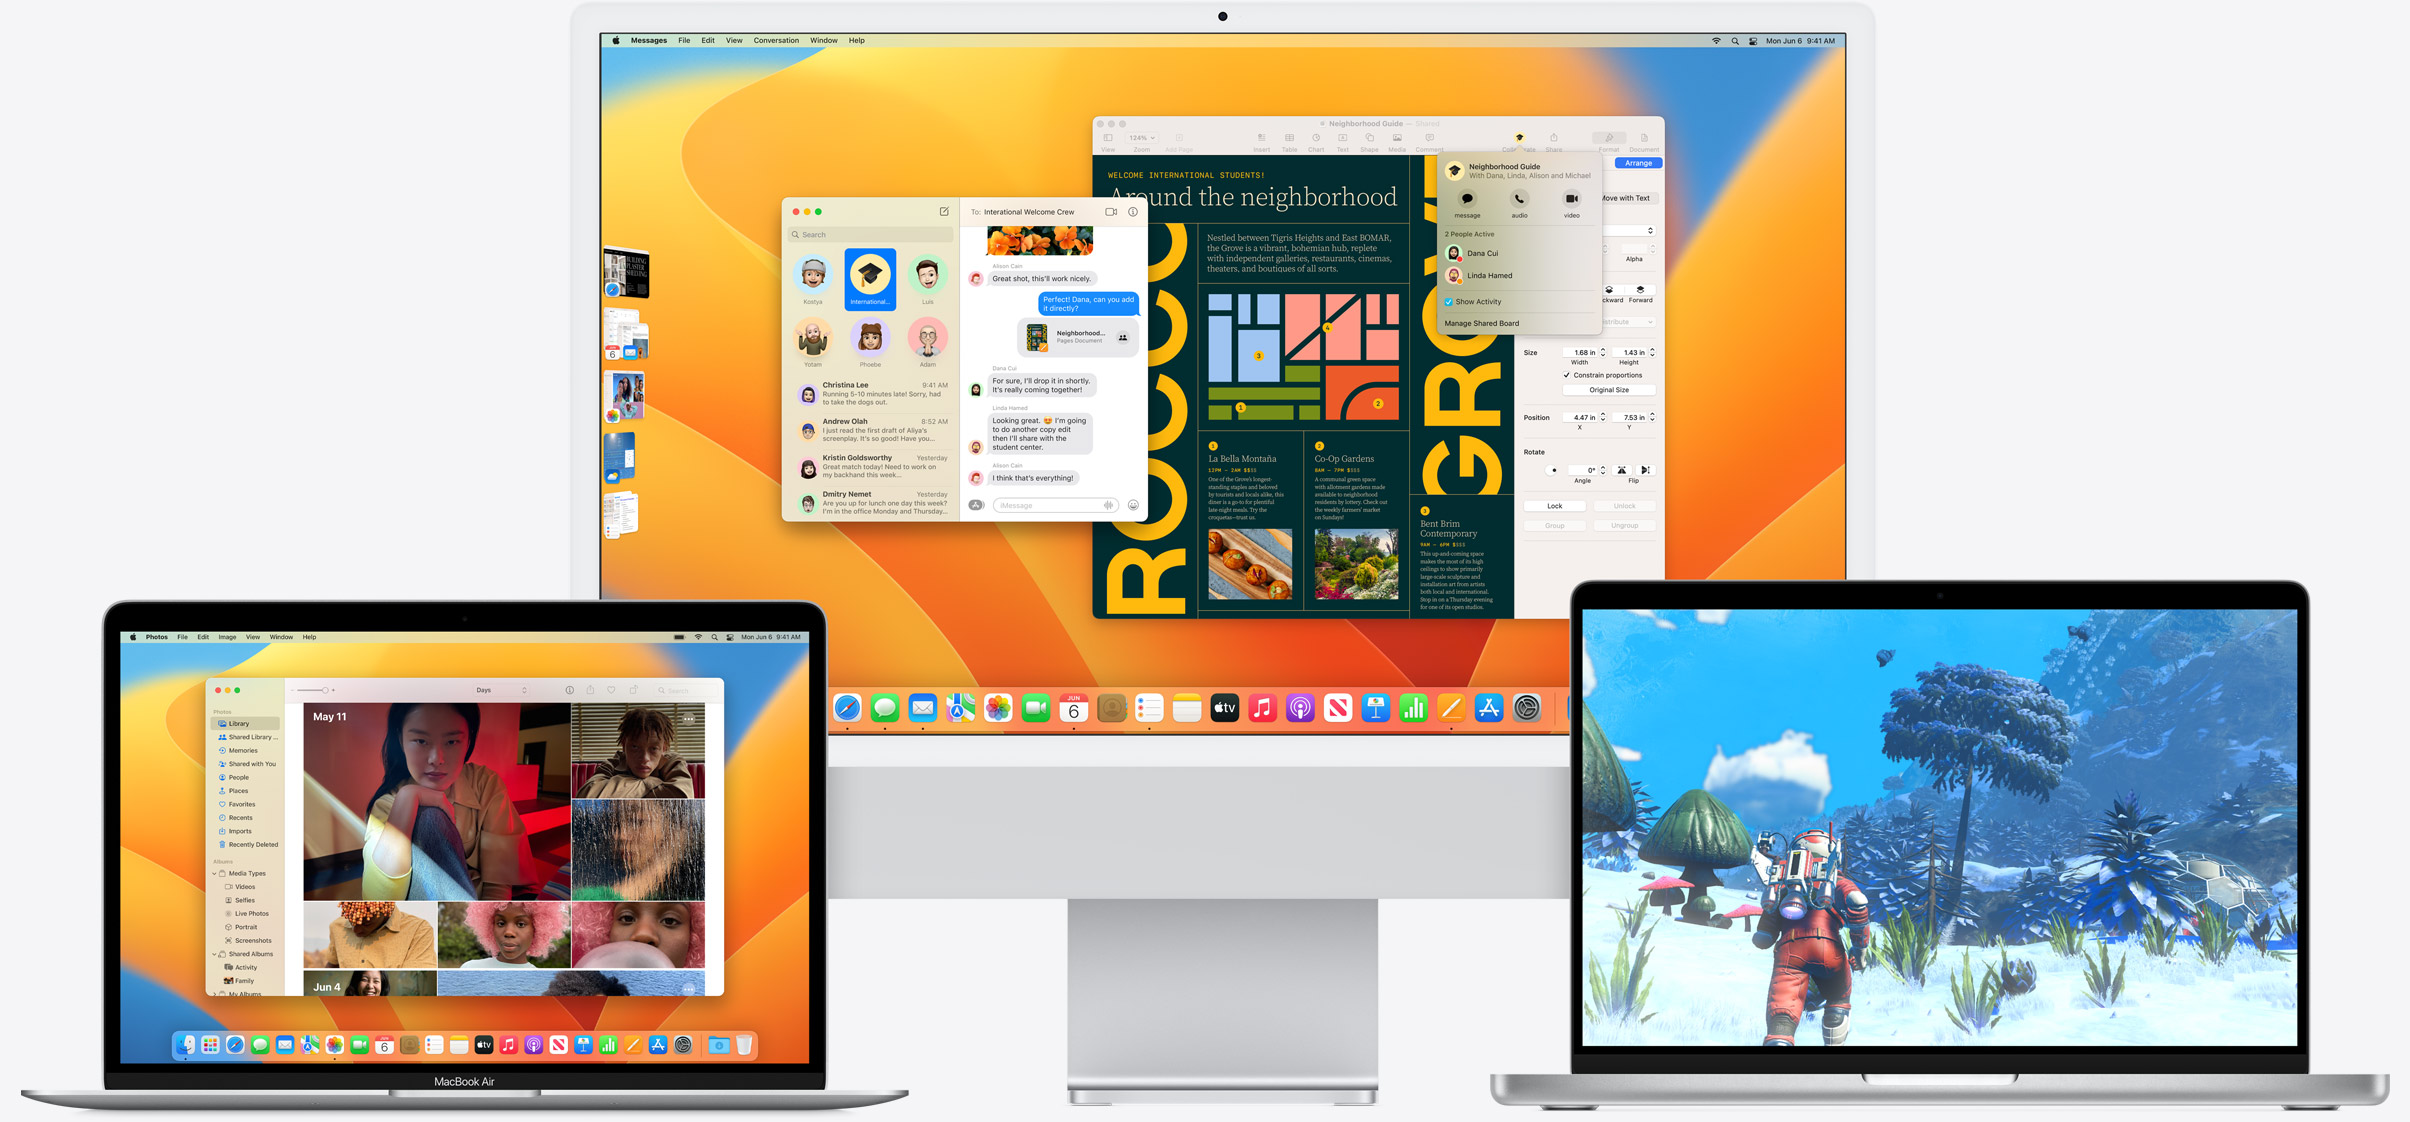 Image showing macOS Ventura running on a MacBook and iMac.